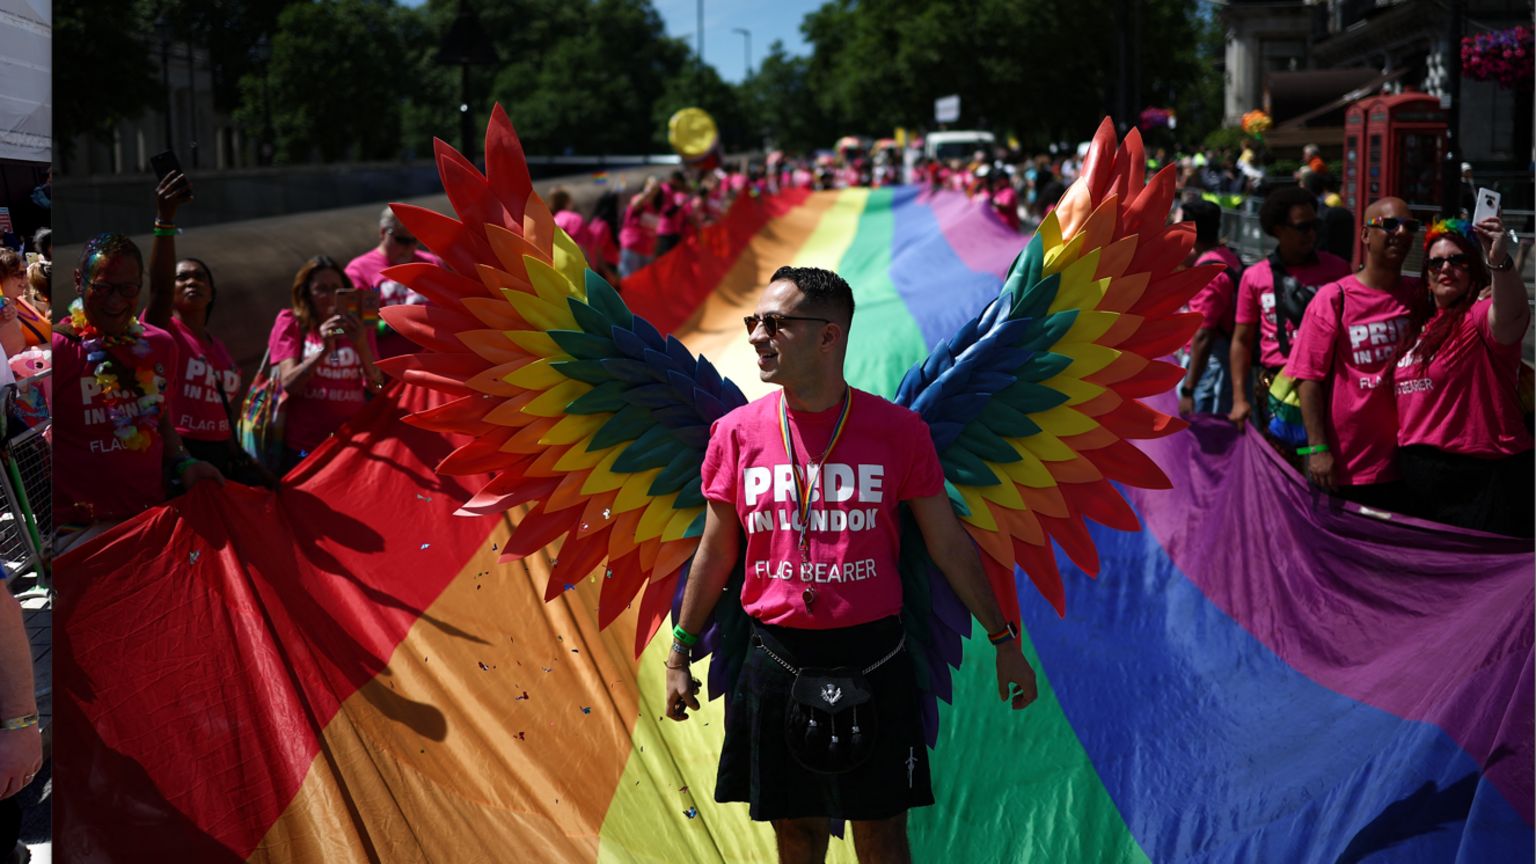 A parade flag bearer wearing a pink t-shirt and rainbow-coloured angel wings stands in front of a long rainbow flag. It stretches down the road behind him and is being held by dozens of people on each side